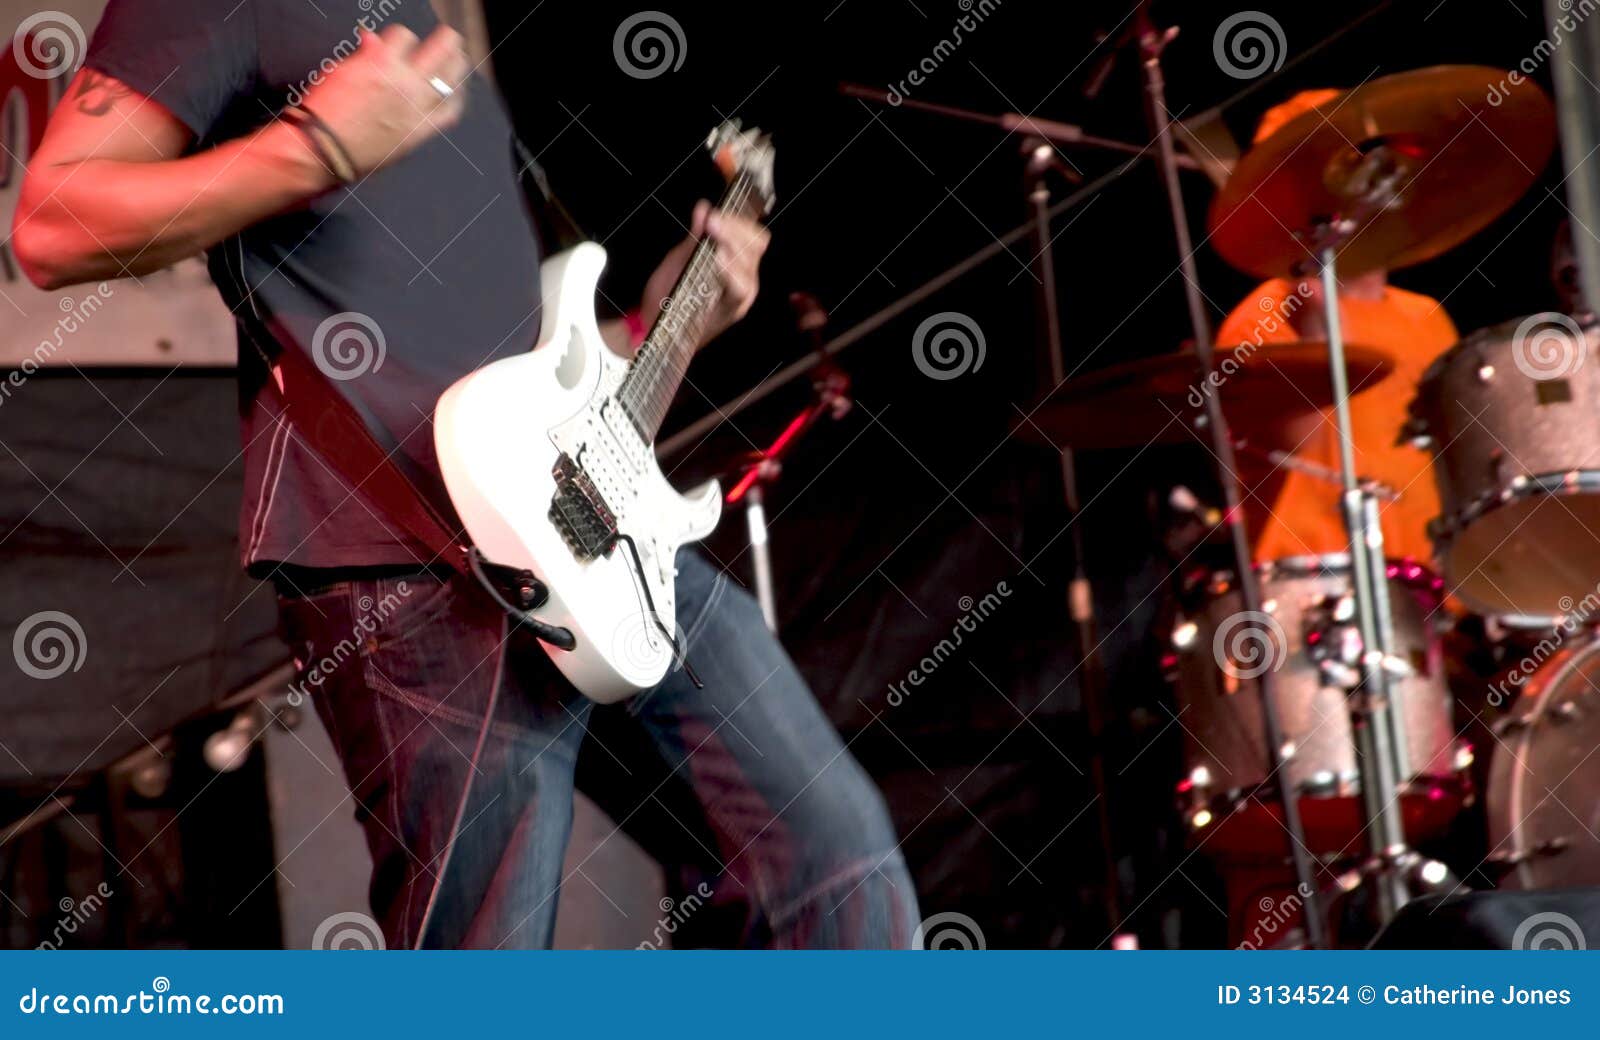 Rock concert stock photo. Image of performing, event, entertainment ...